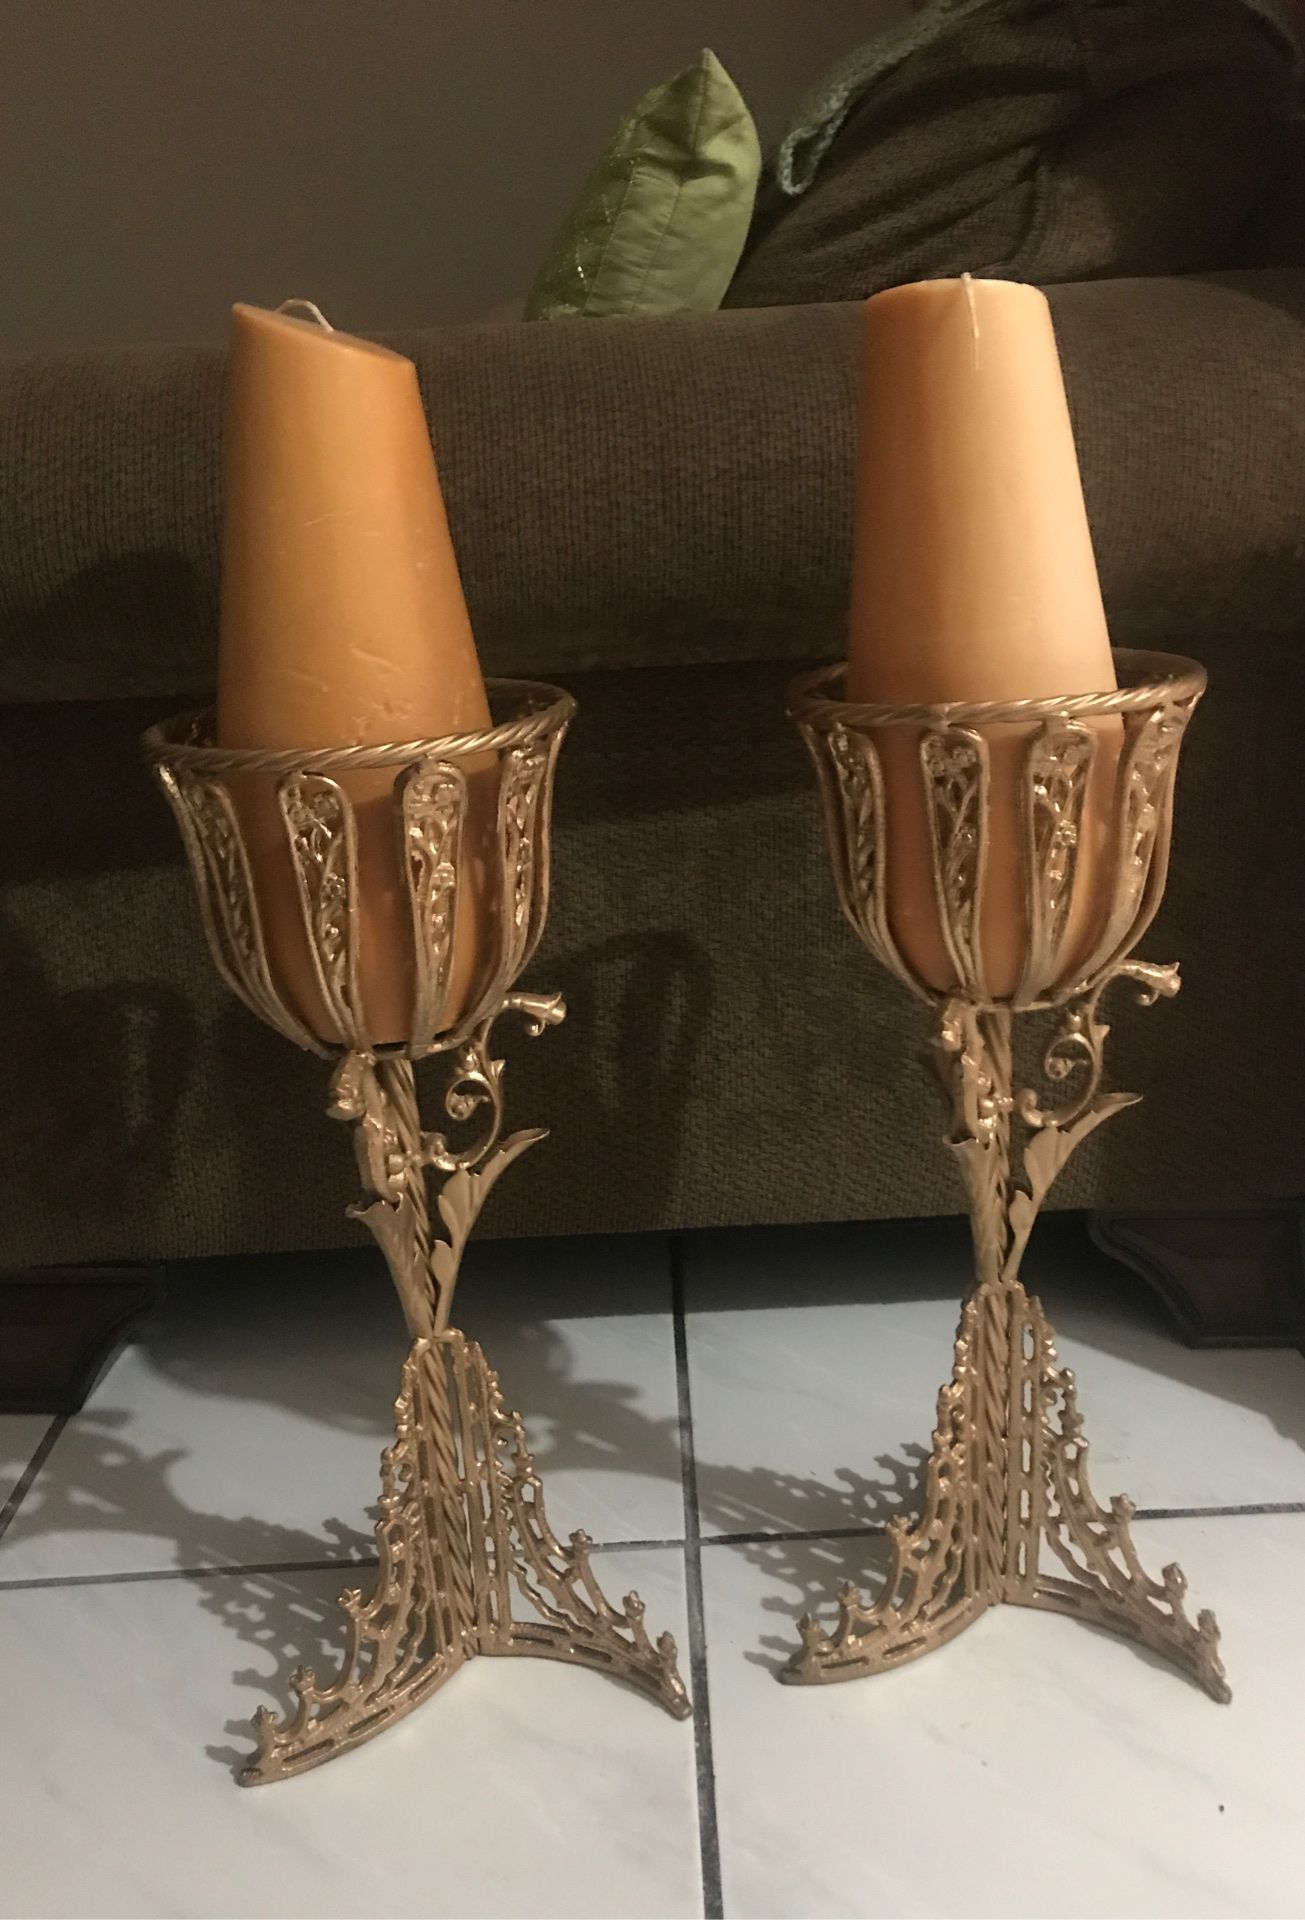 Candles with candle holder